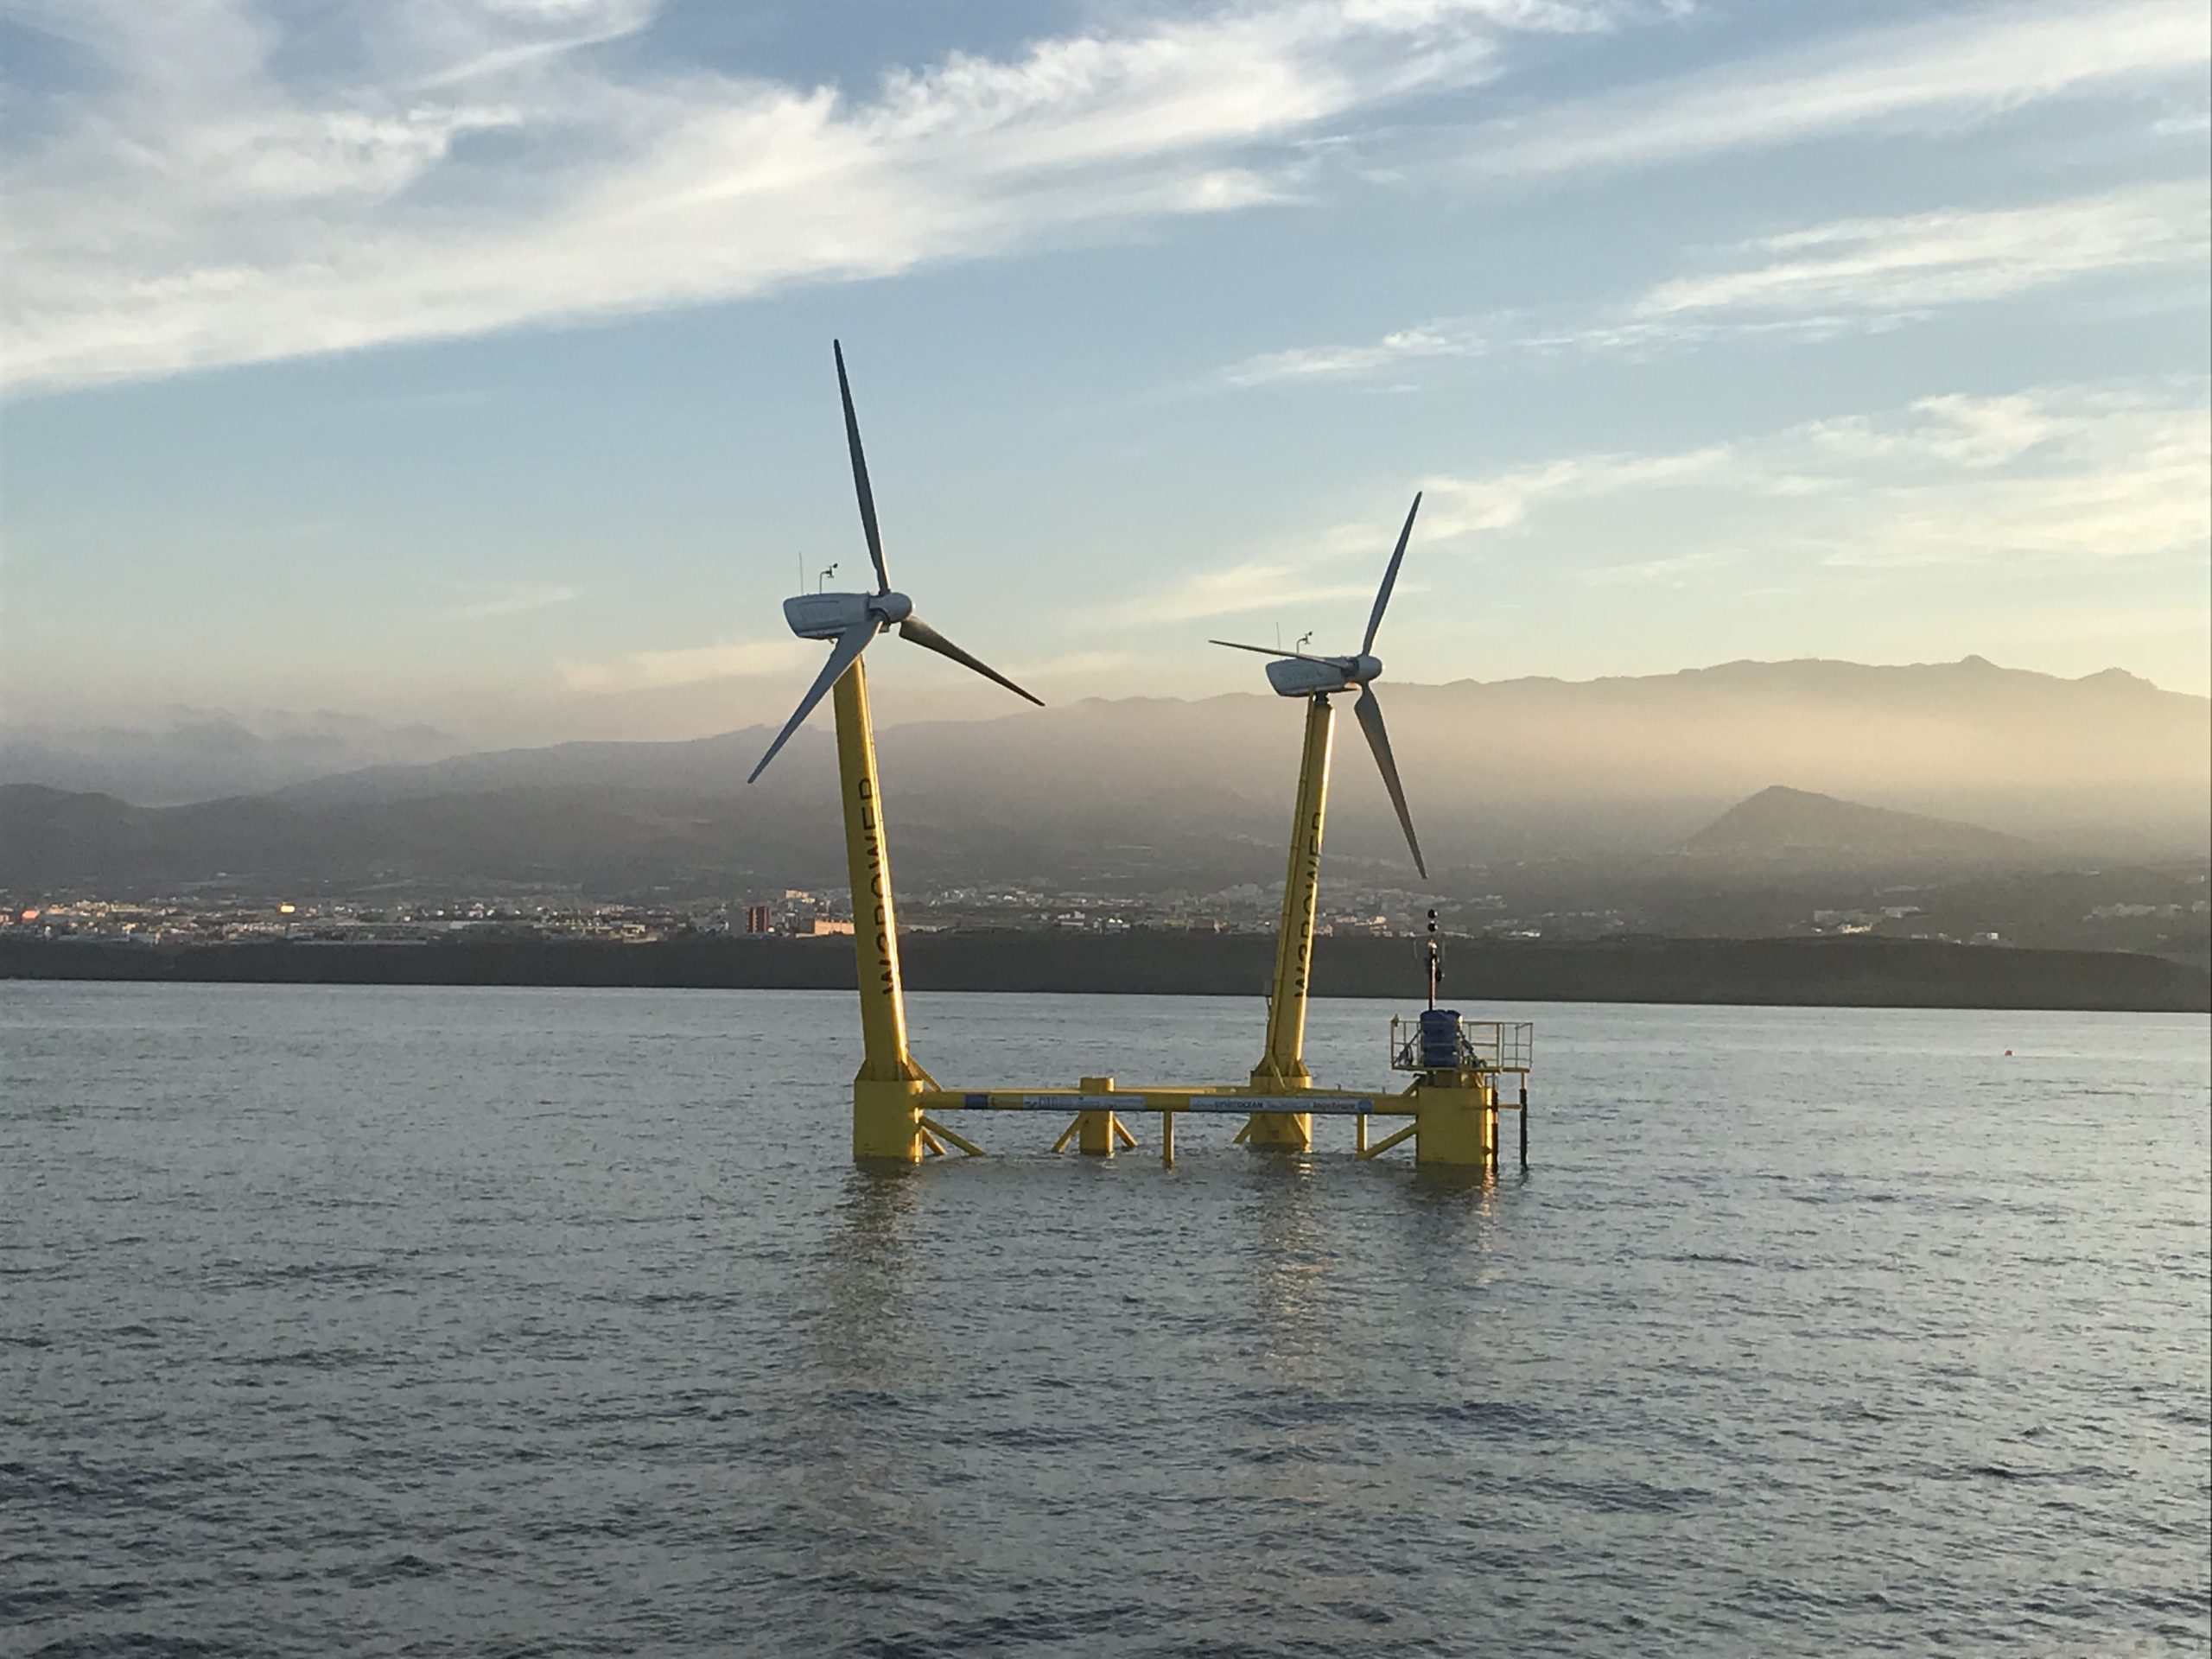 Gran Canaria leads the pioneering AquaWind project to merge wind power and aquaculture